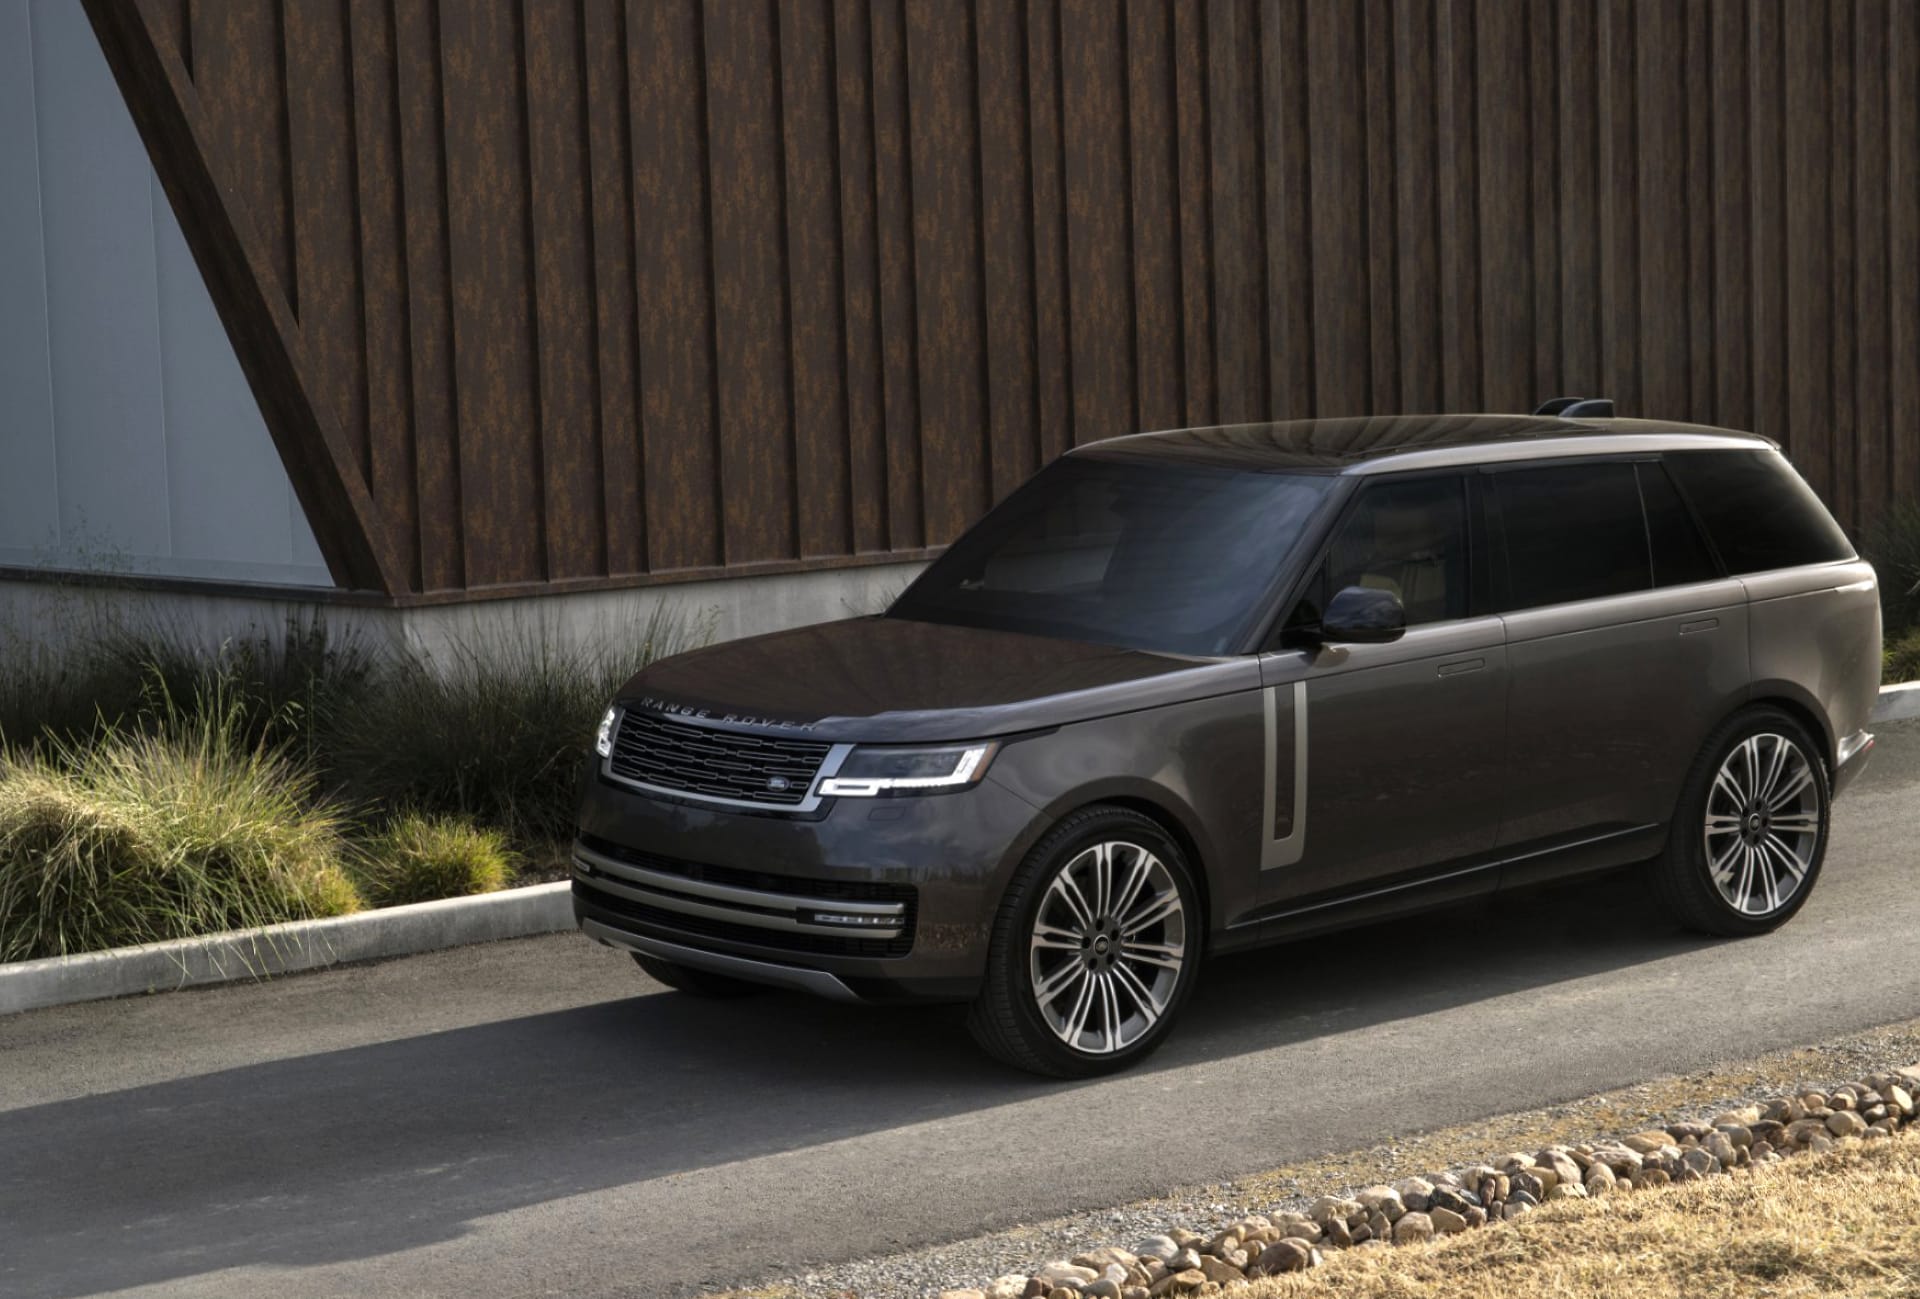 Range Rover SE P400 wallpapers HD quality